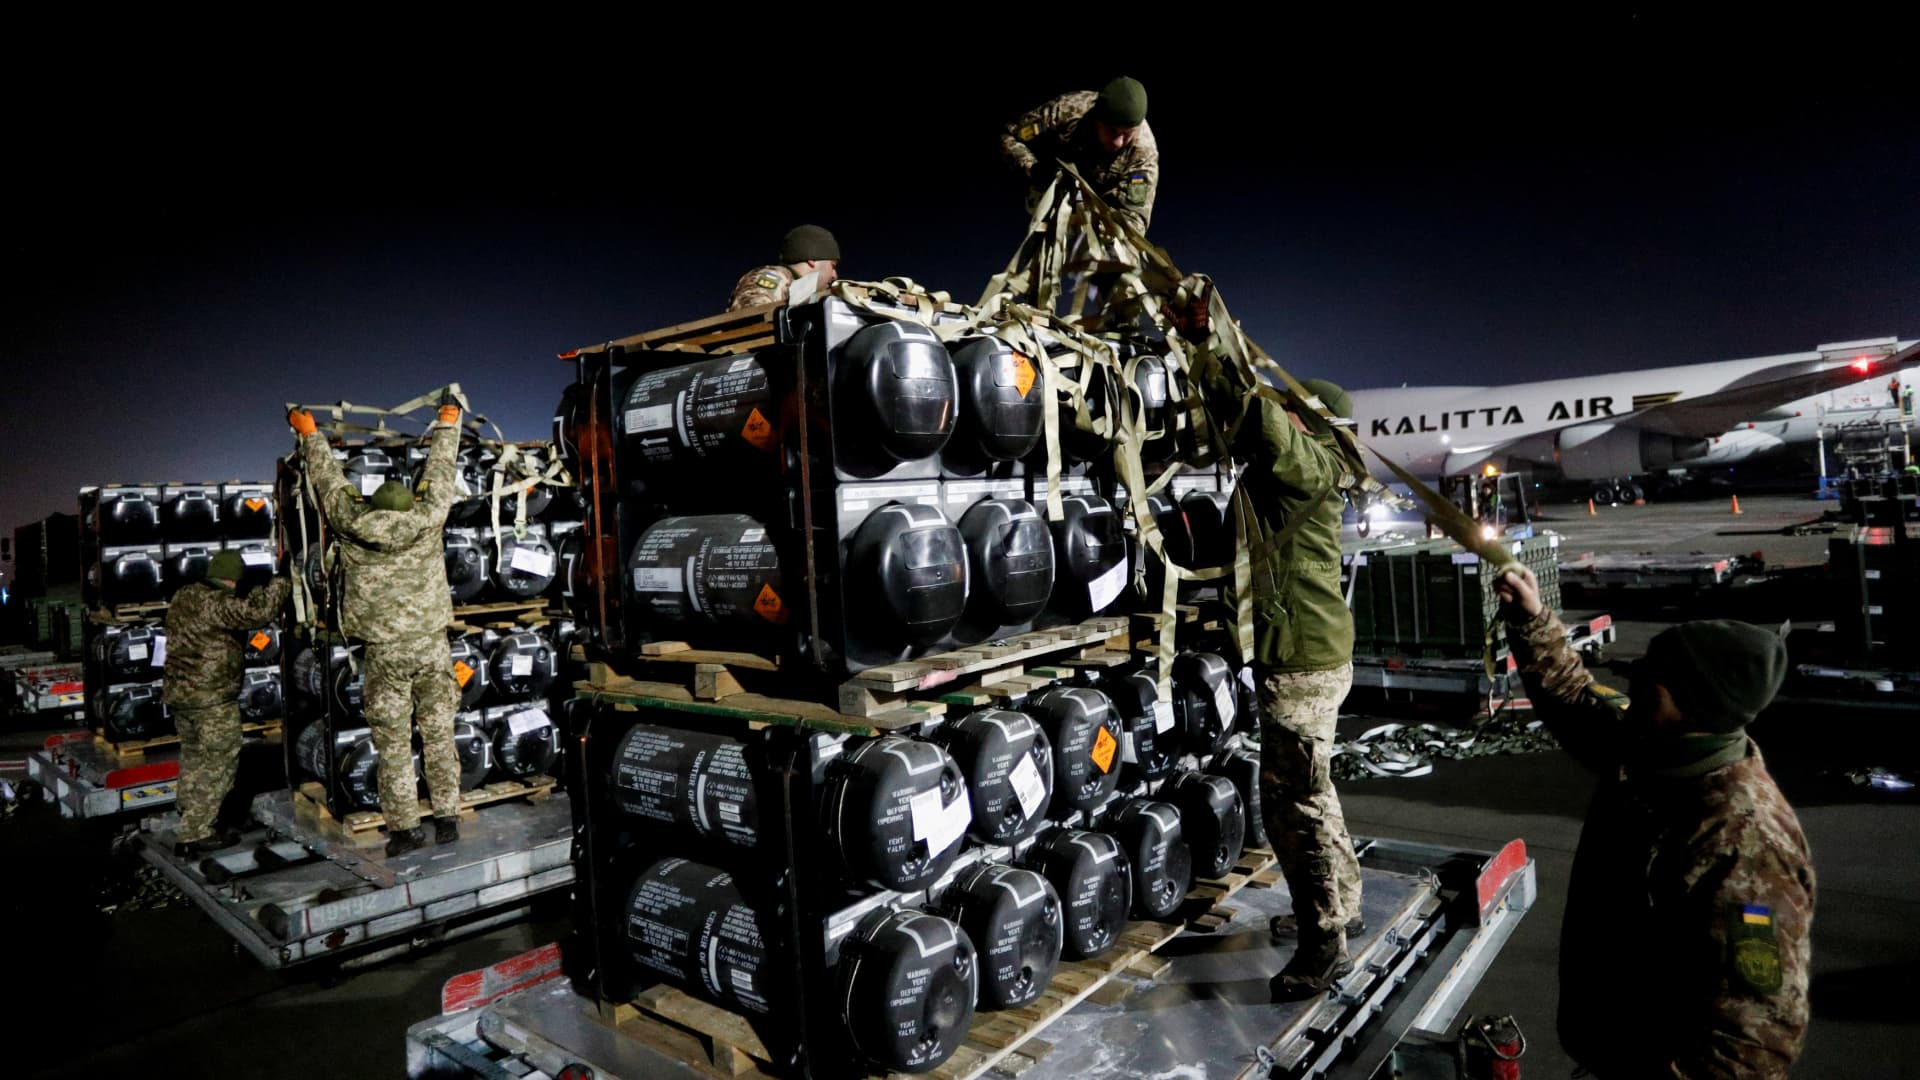 Ukrainian service members unpack Javelin anti-tank missiles, delivered by plane as part of a U.S. military support package for Ukraine, at the Boryspil International Airport outside Kyiv, Ukraine, on Feb. 10, 2022.